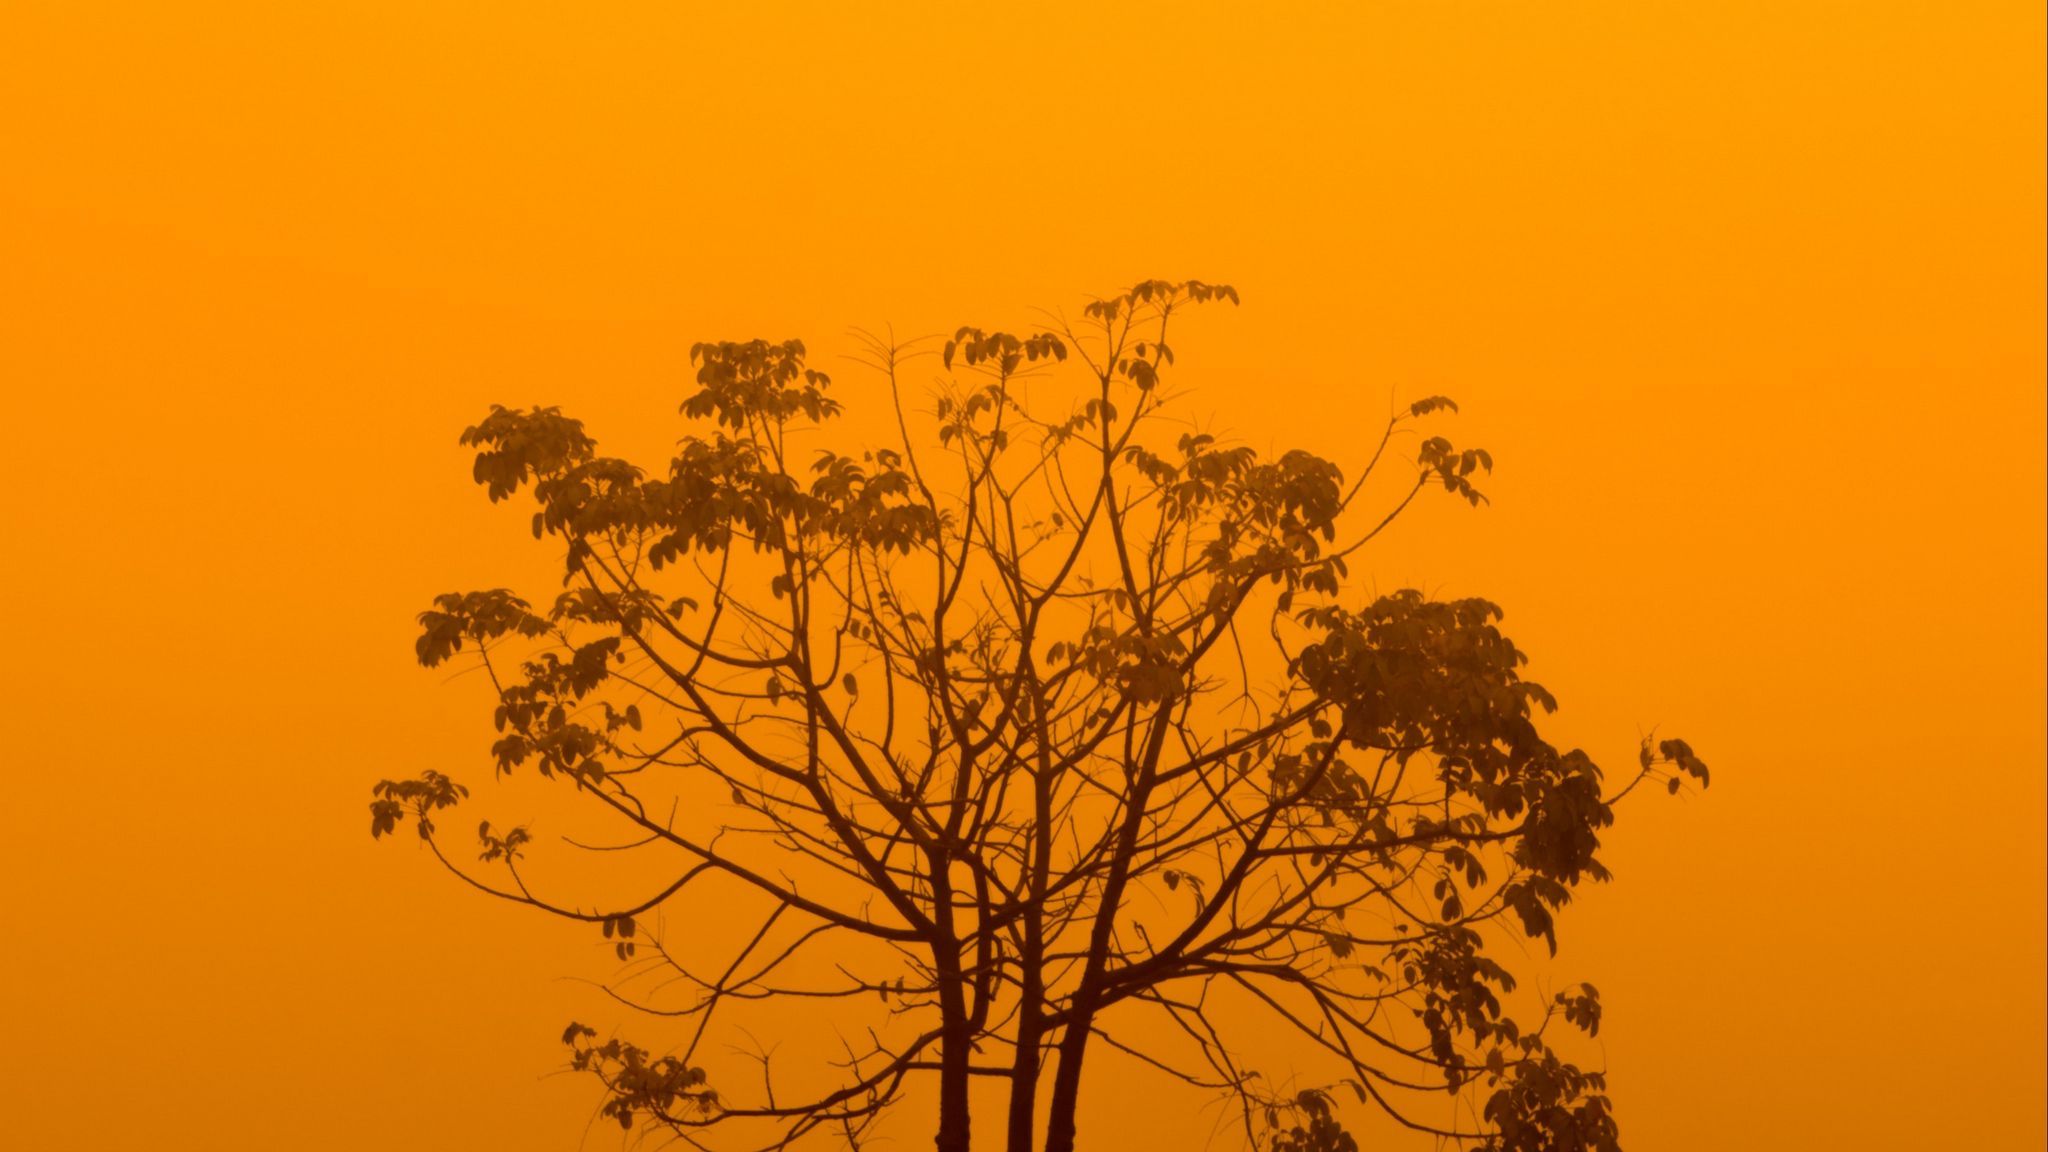 A tree is silhouetted against an orange sky. - 2048x1152